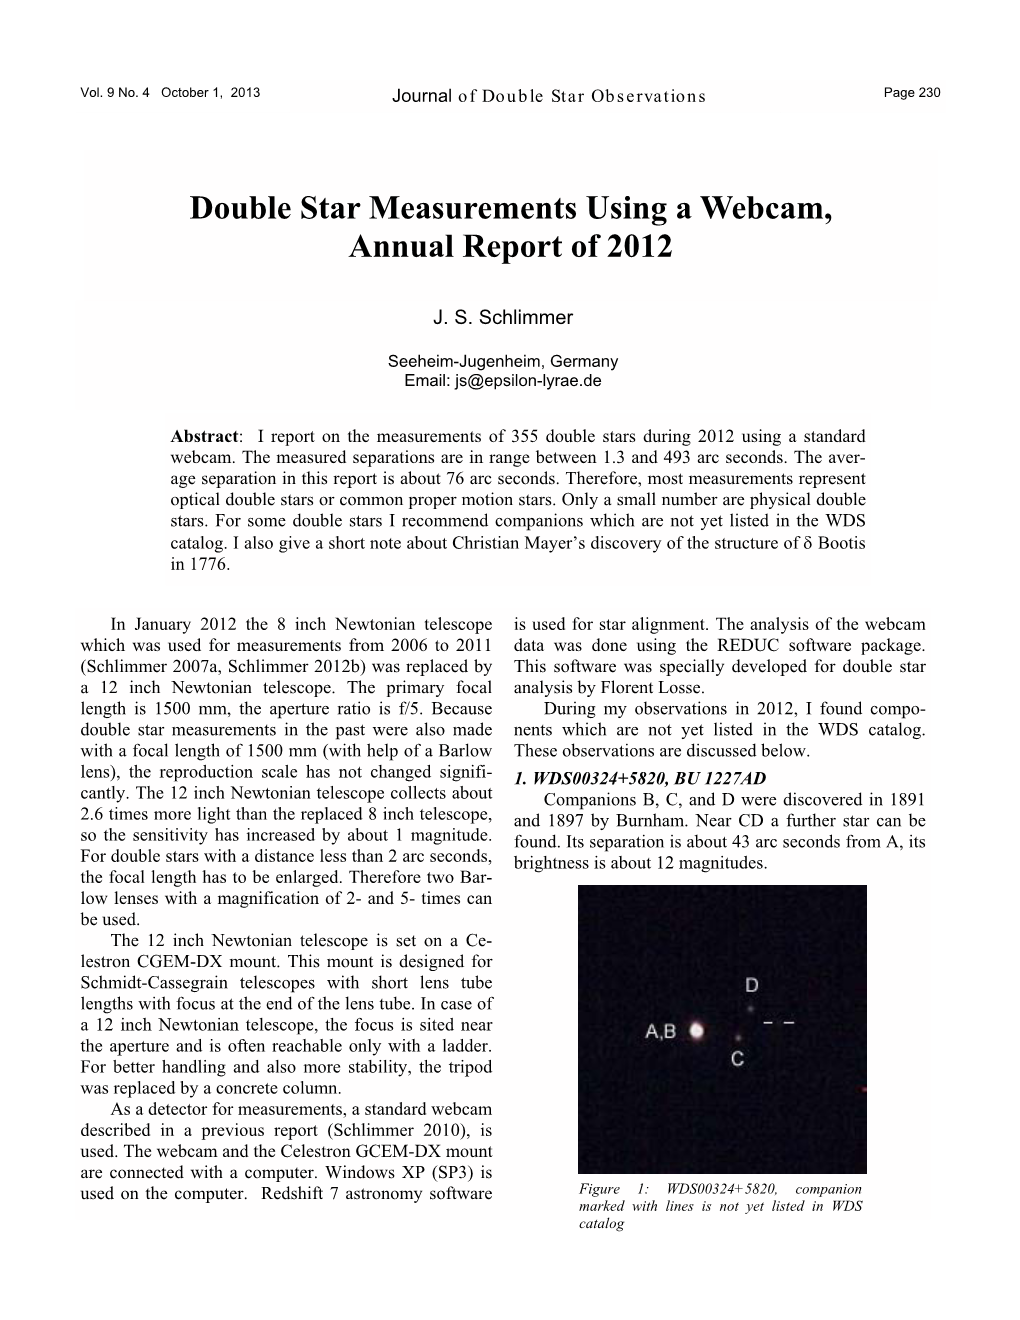 Double Star Measurements Using a Webcam, Annual Report of 2012